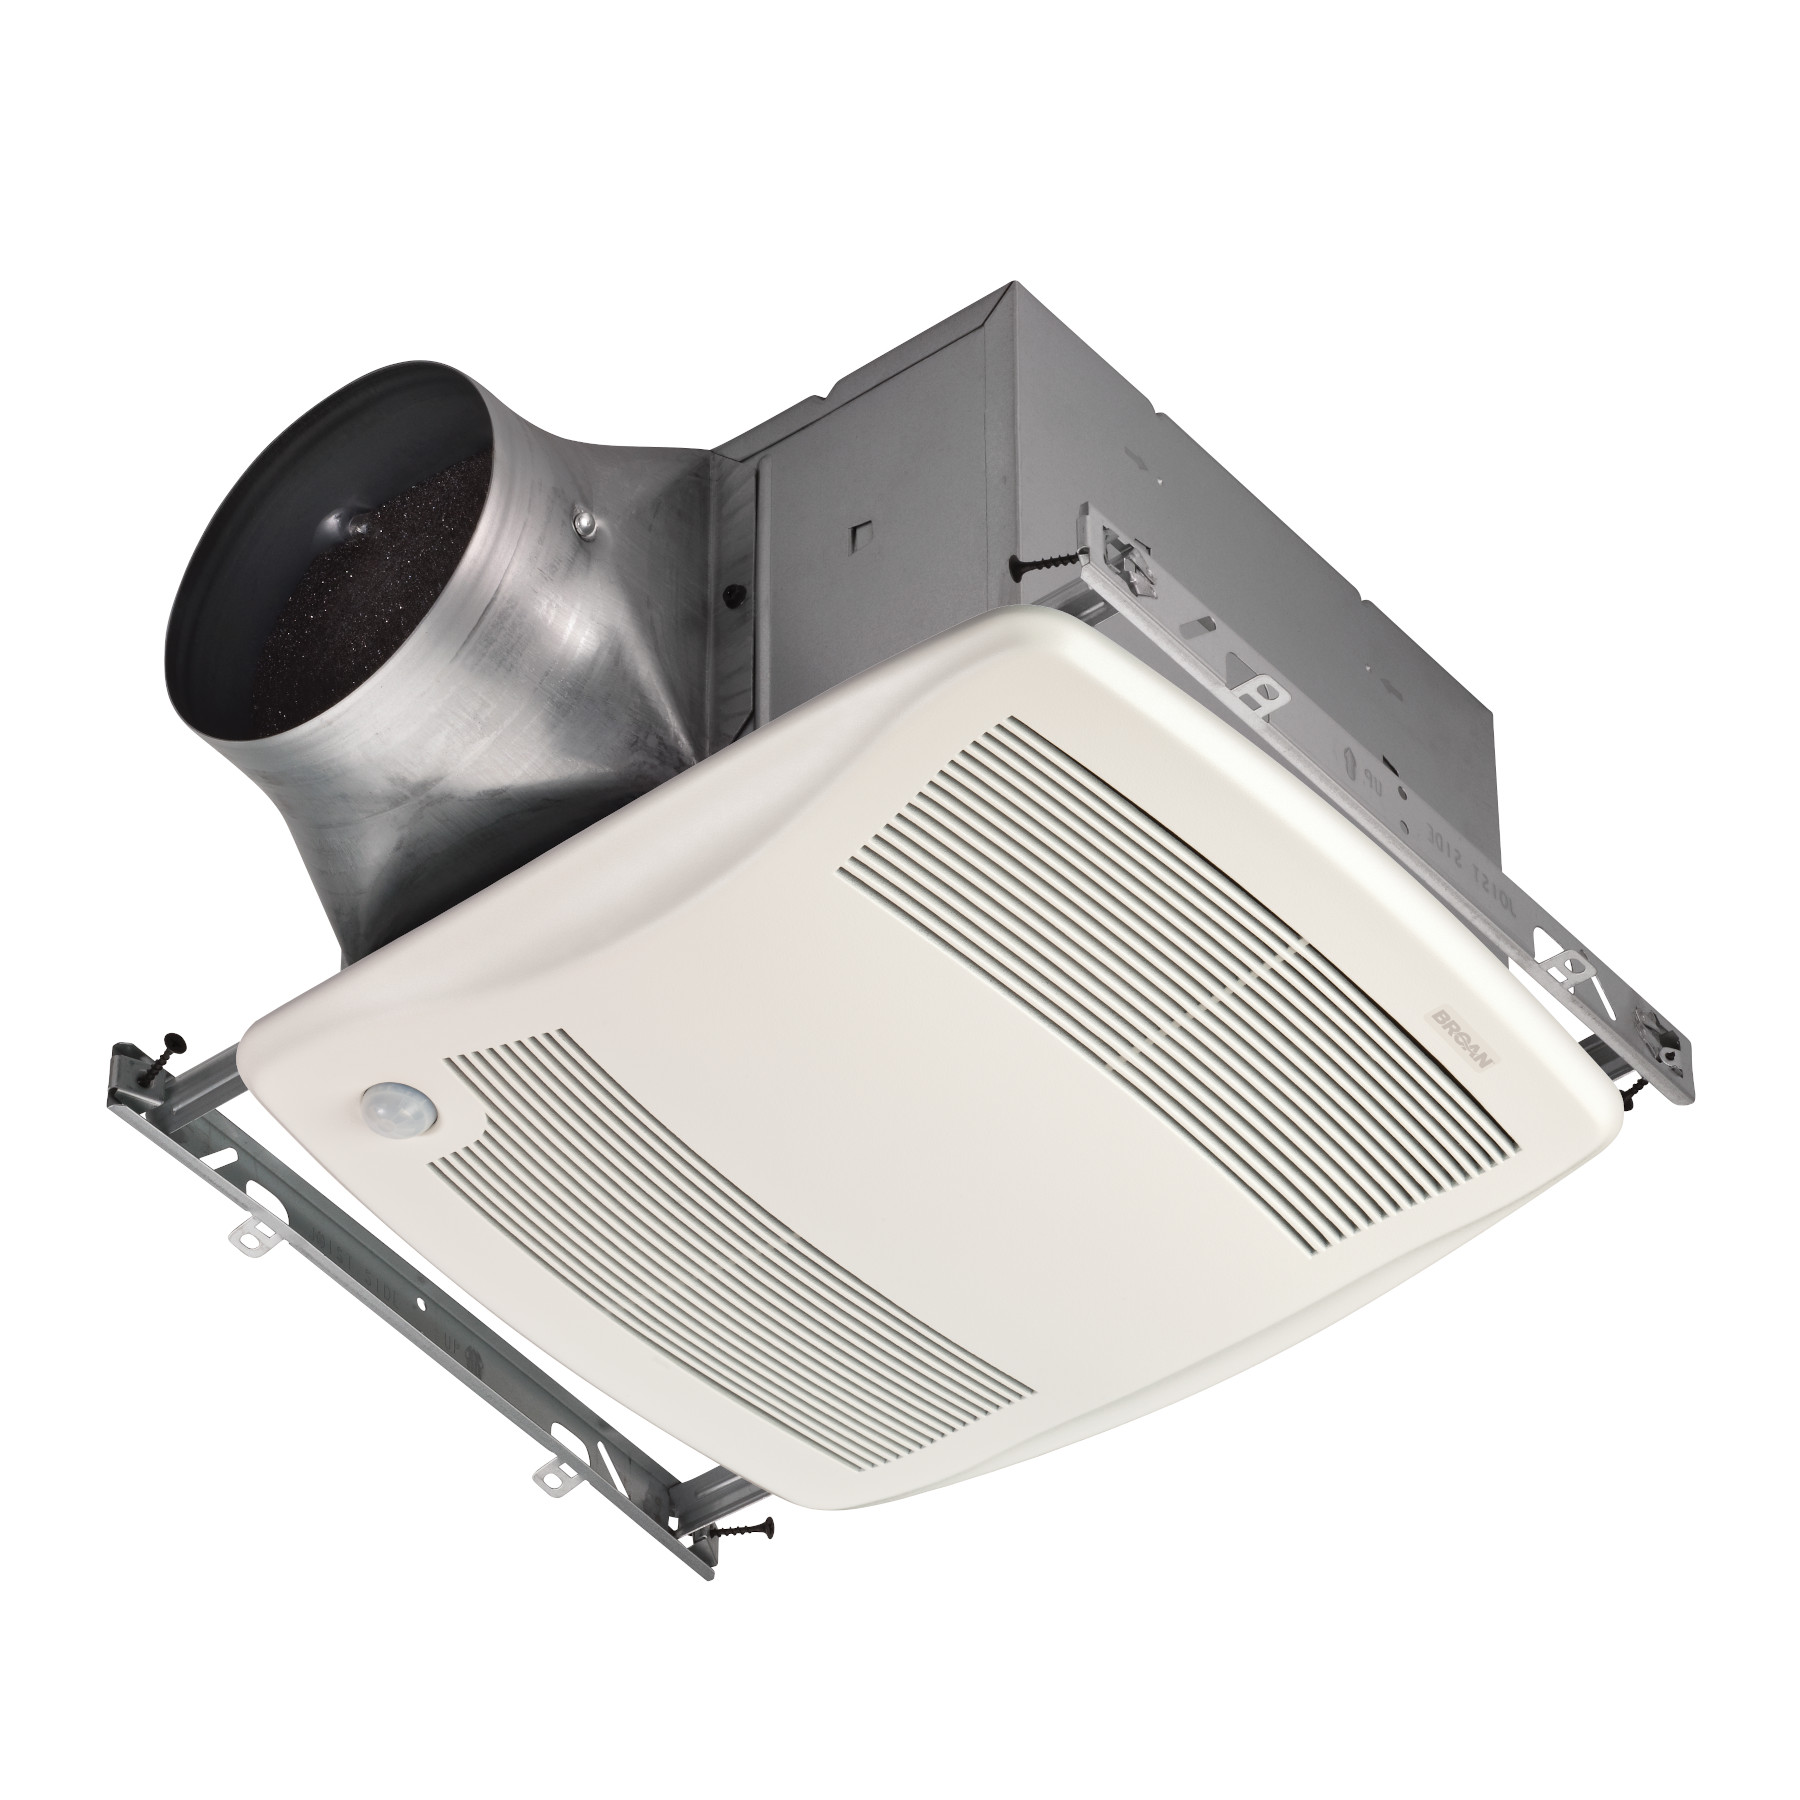 ULTRA GREEN ZB Series 80 CFM Multi-Speed Ceiling Bathroom Exhaust Fan with Motion Sensing, ENERGY STAR® certified